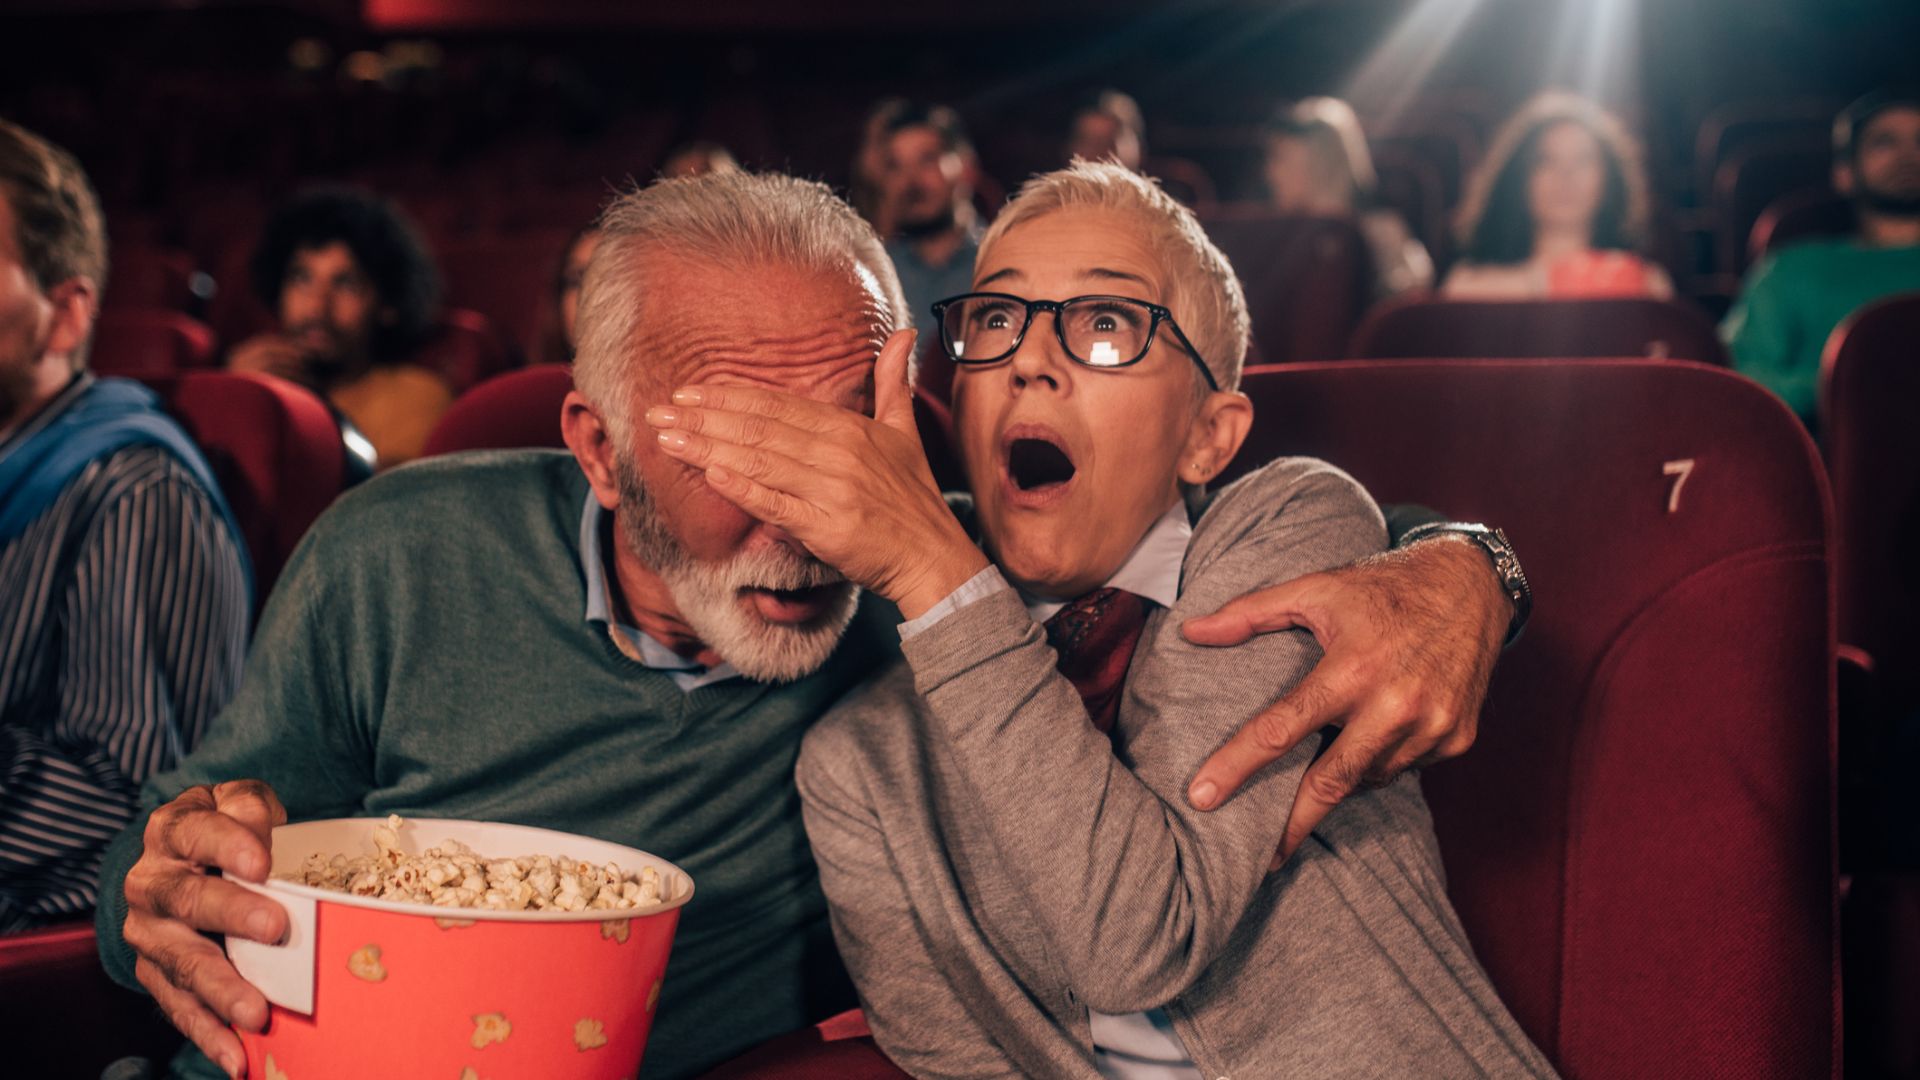 A middle age couple in a movie theater with a popcorn bucket. Women covers man's eyes with her palm